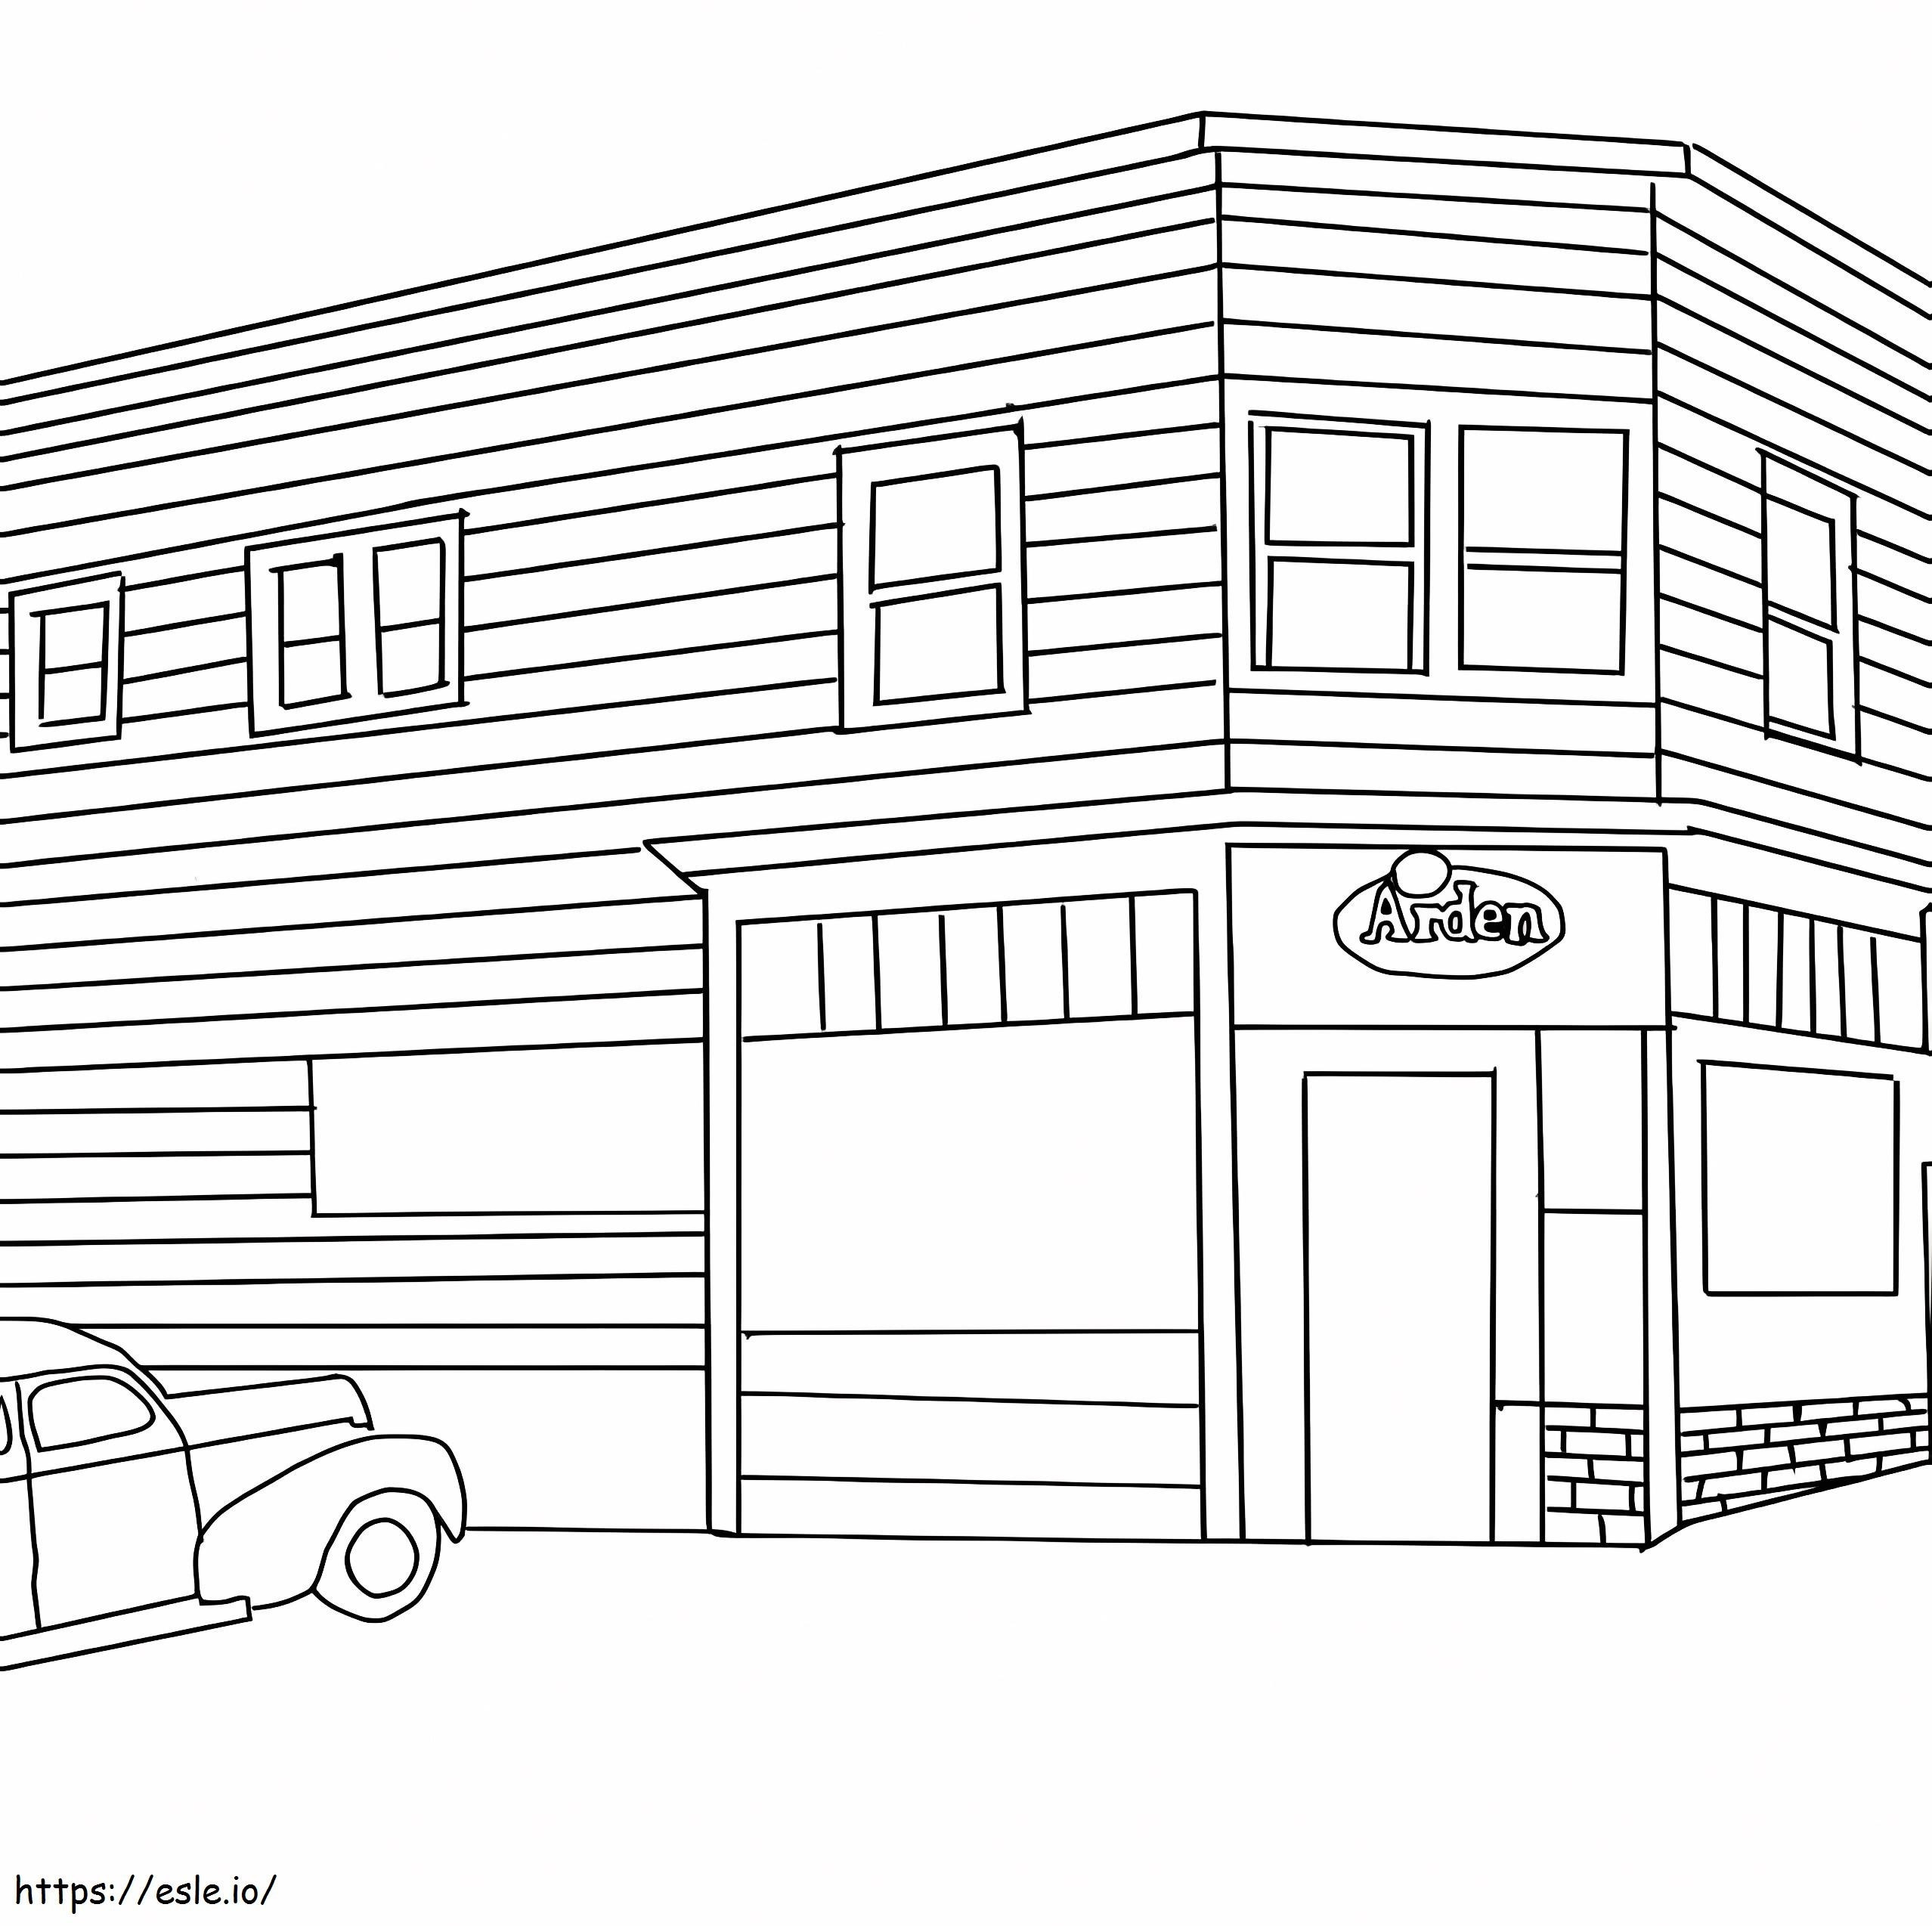 Printable Building coloring page